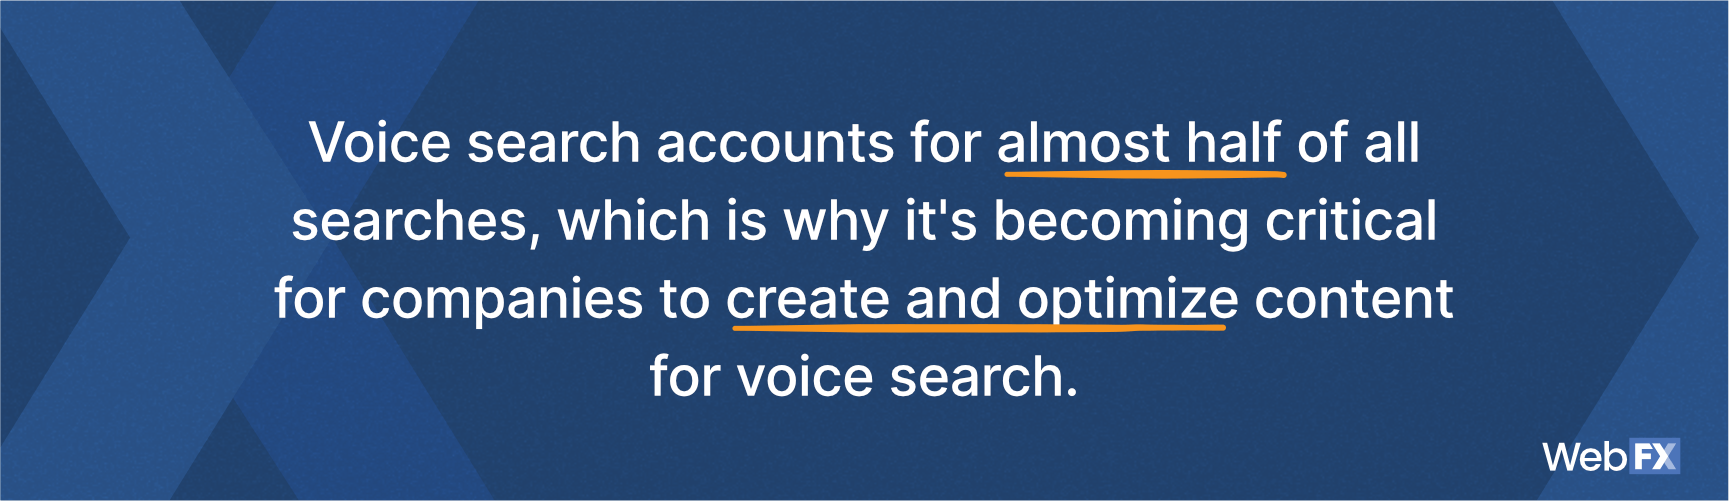 A statistic on voice search and its value to companies